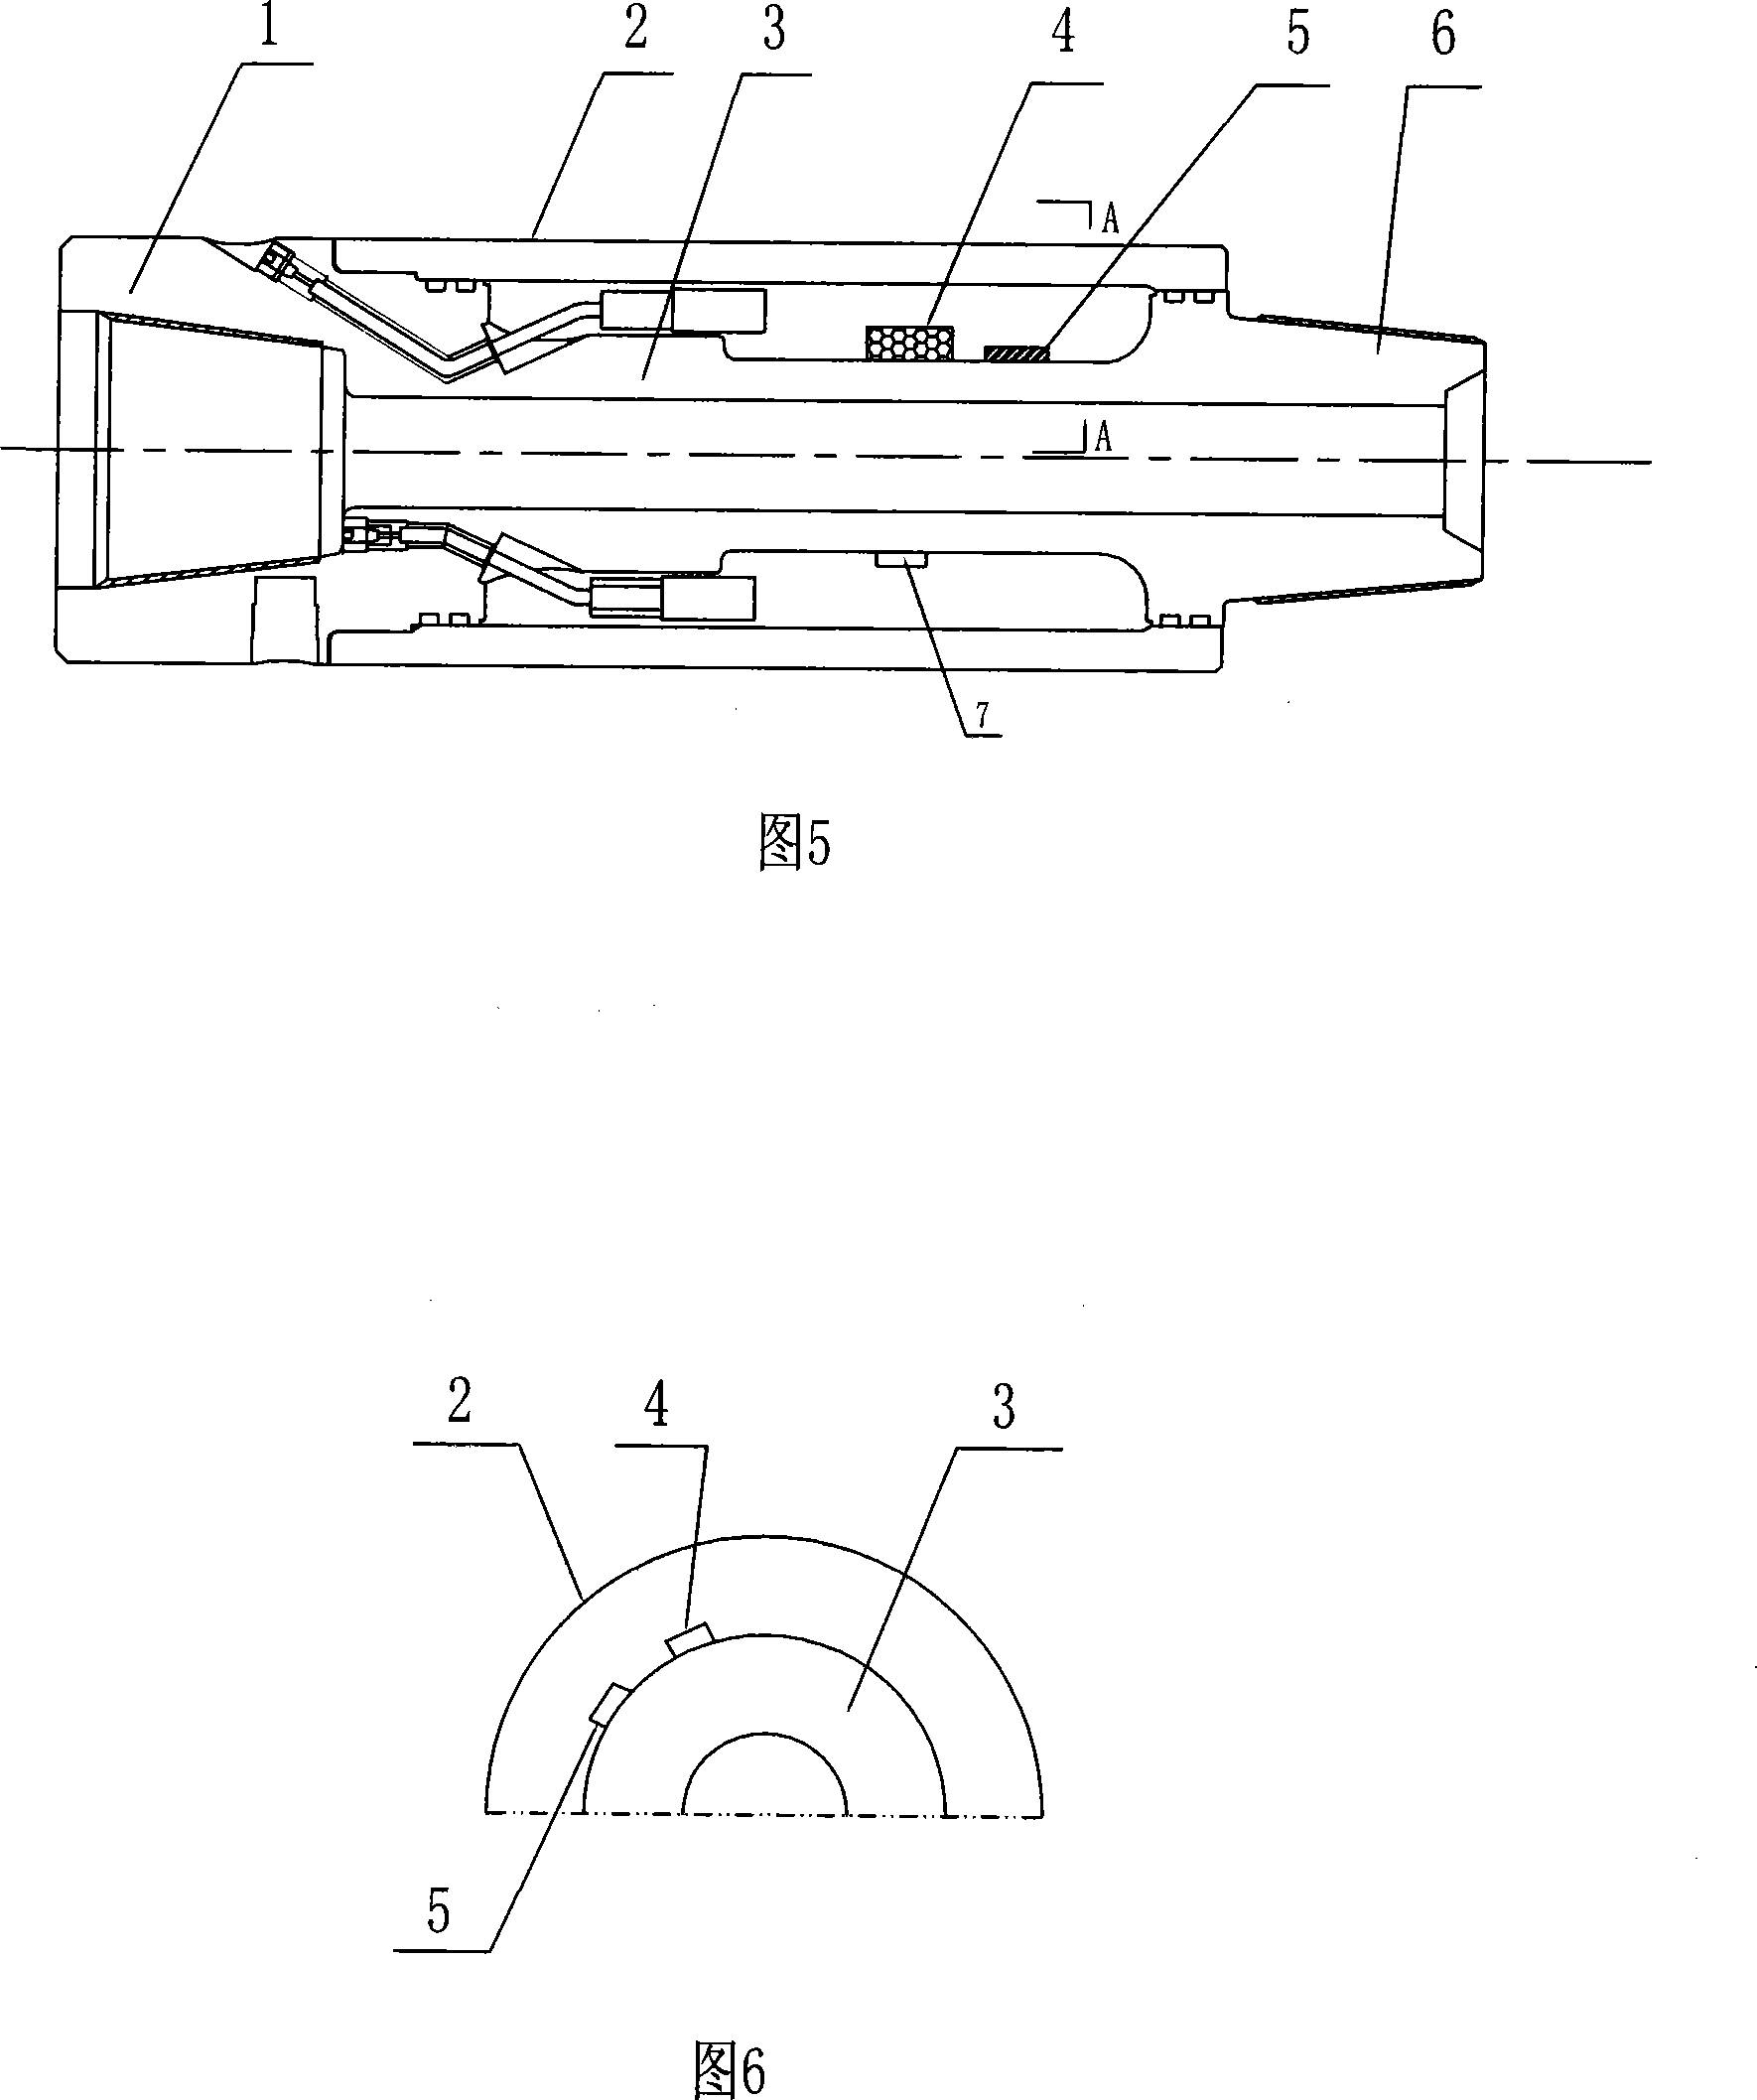 Measurement method of down-hole boring tool (drill) rotative velocity and direction and short node